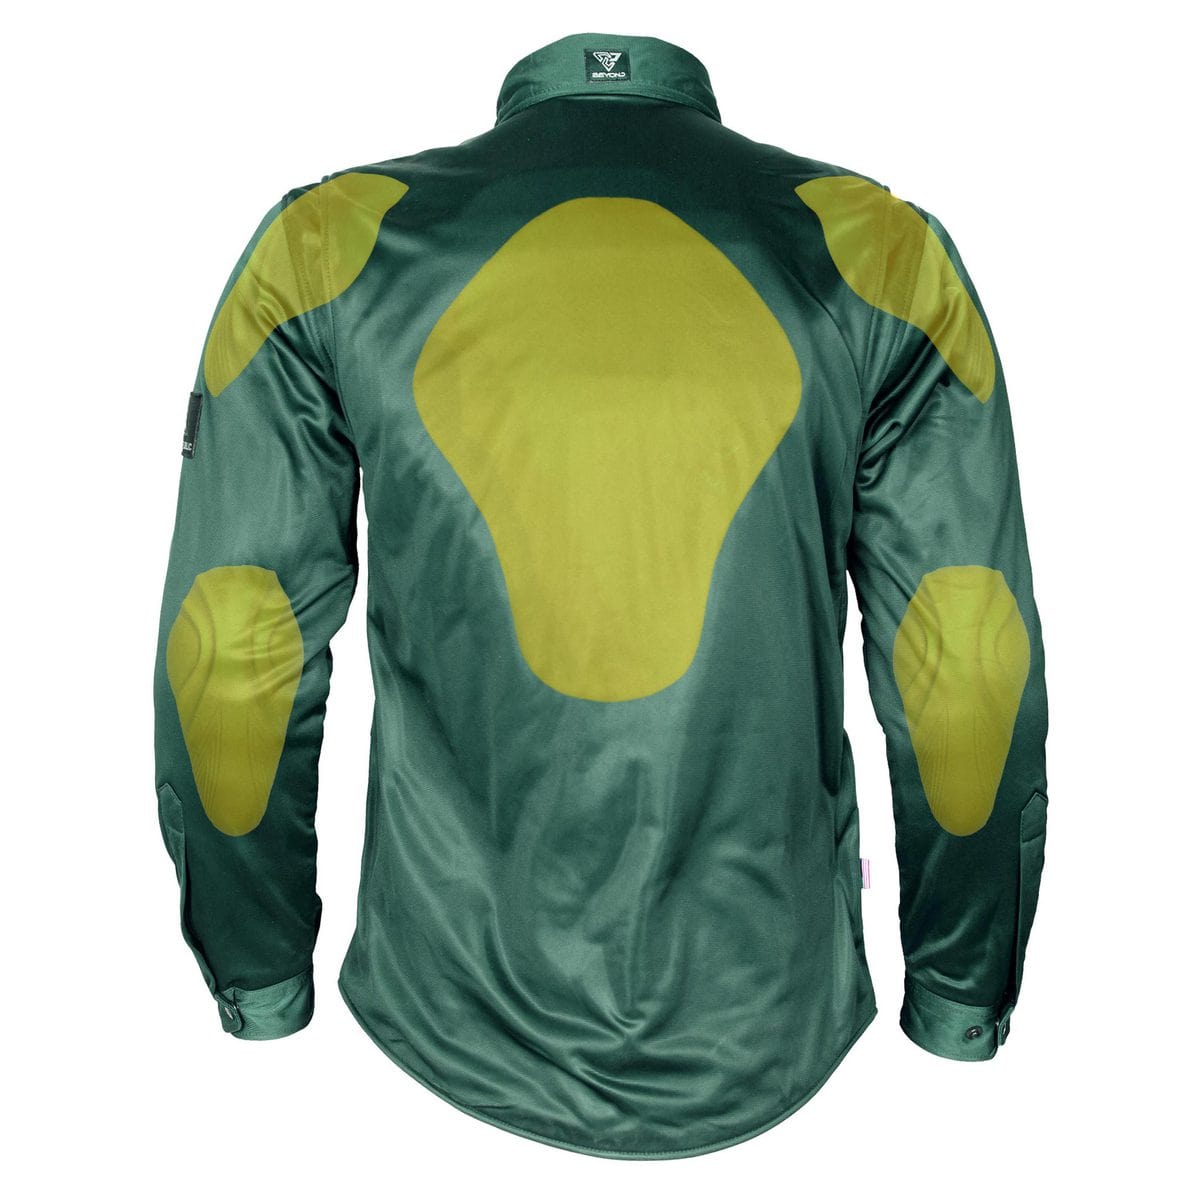 Ultra Protective Shirt with Pads - Green Solid